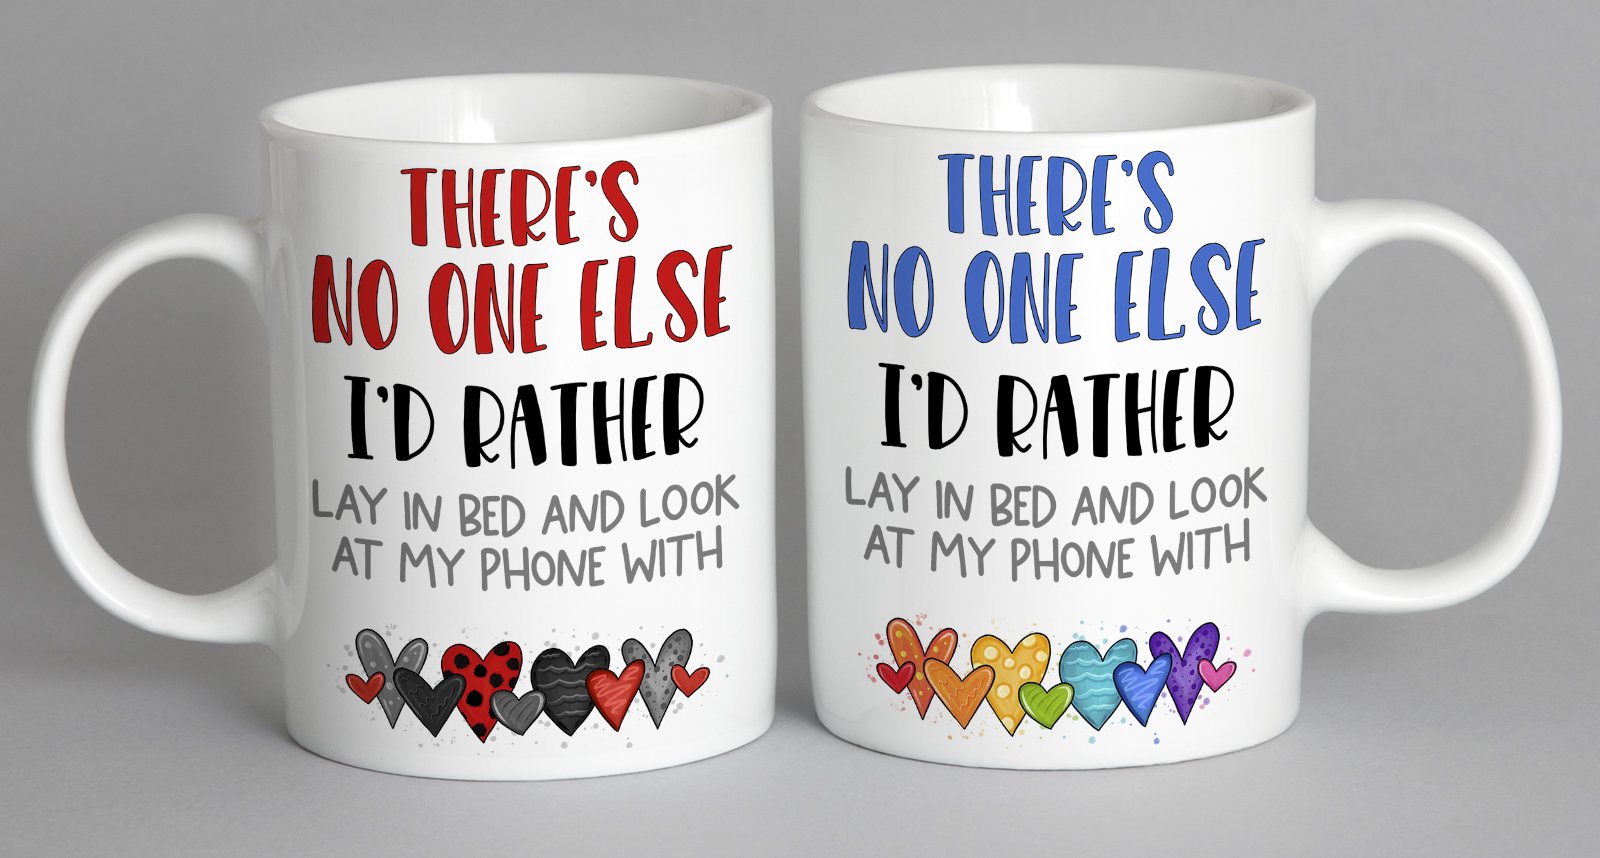 Theres No One Else Id Rather Lay In Bed And Look At My Phone With (Rainbow Version) Mug Coffee